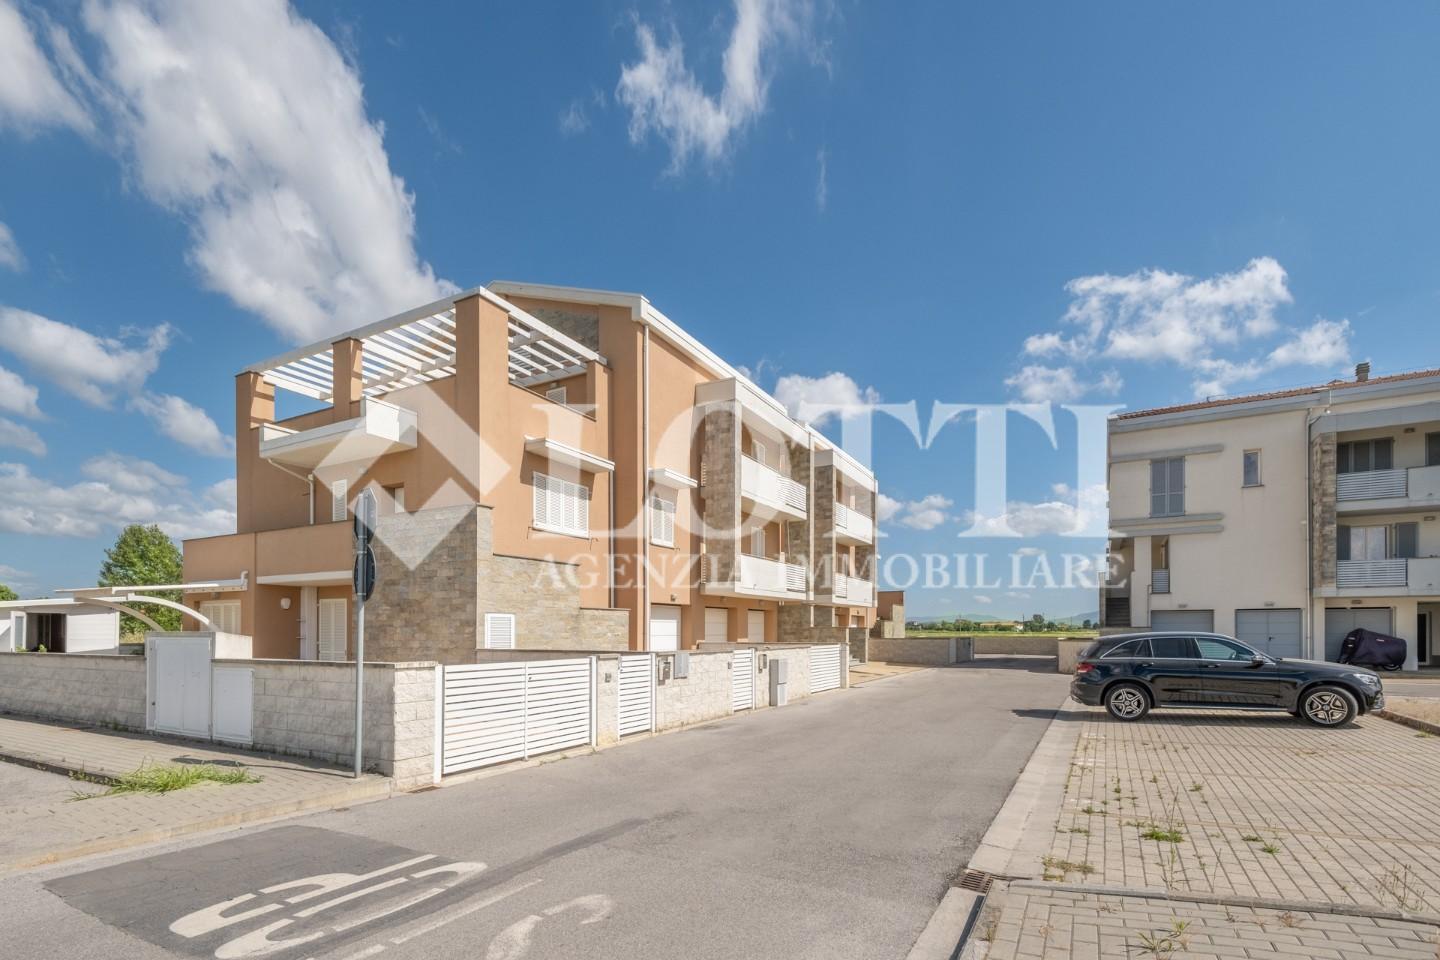 Apartment for sale, ref. 822- A